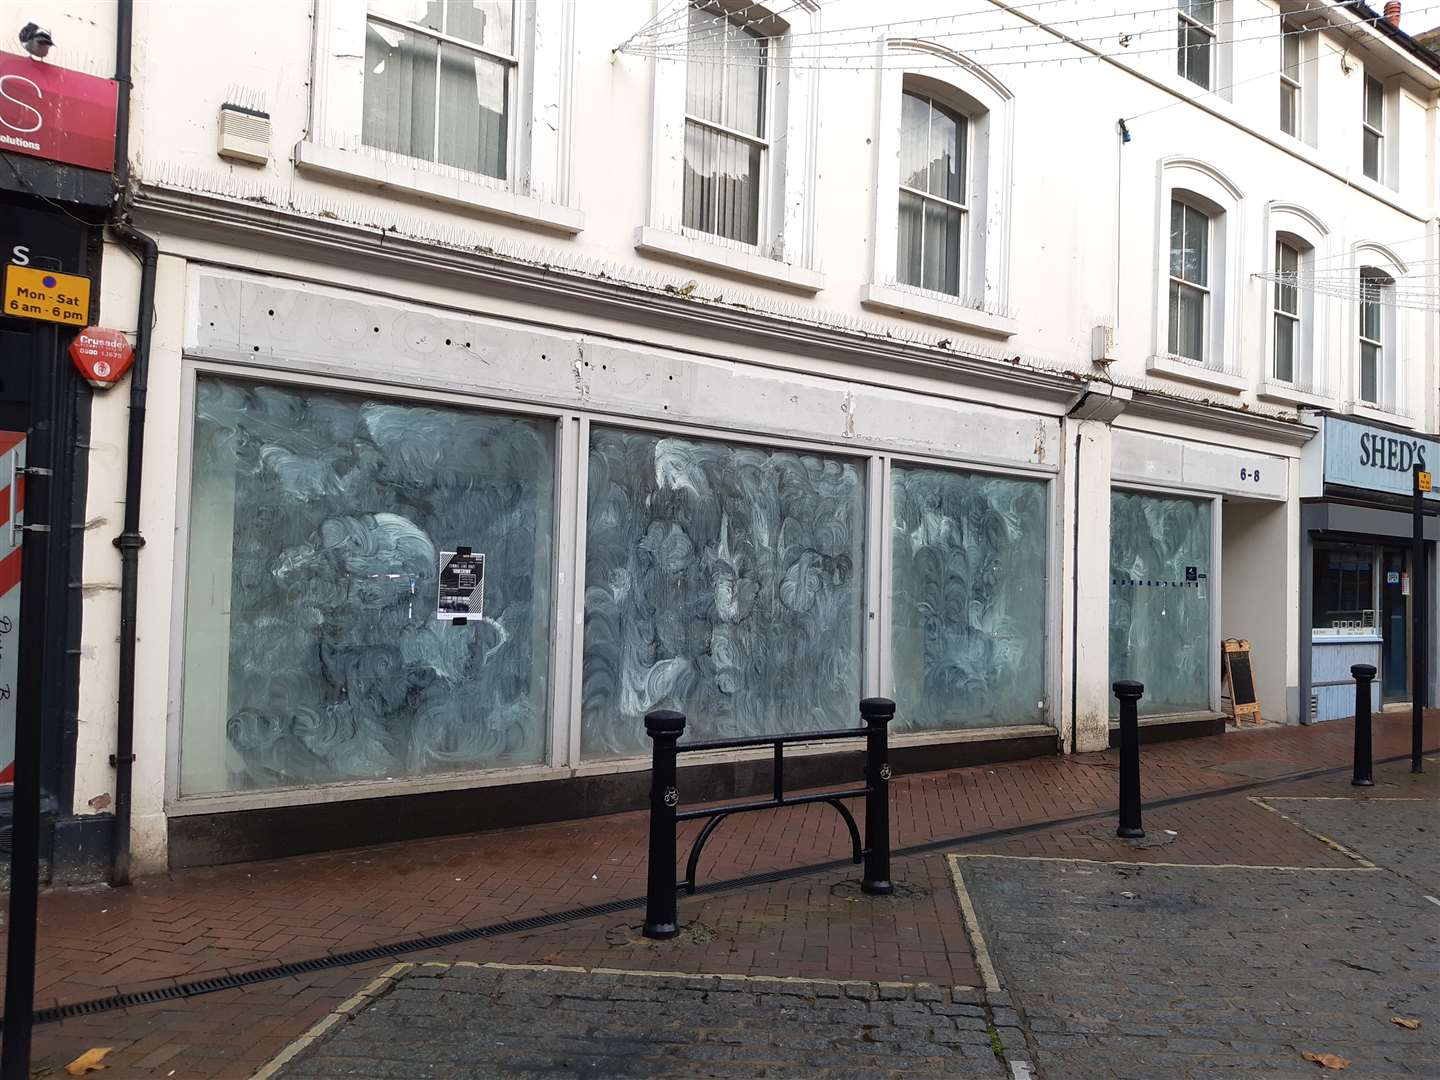 Empty shop fronts are an all too familiar sight in our town centres